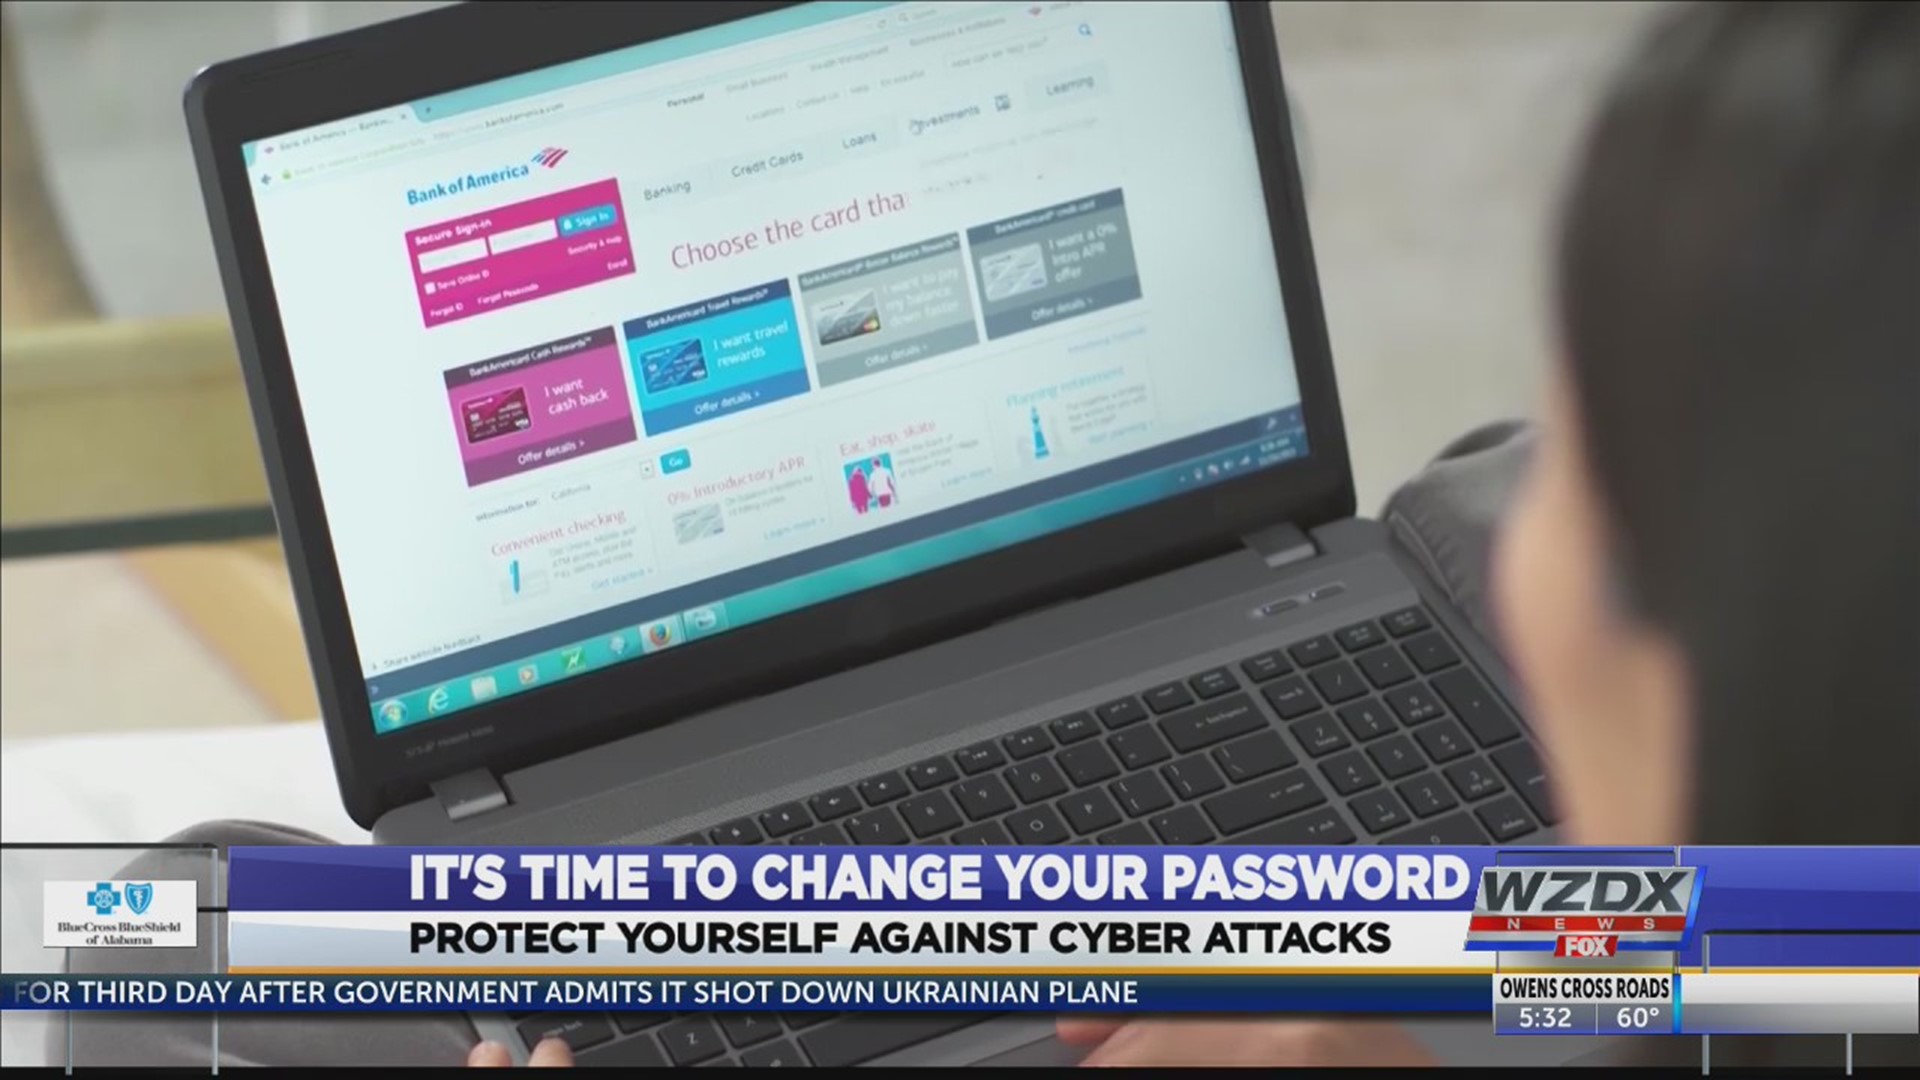 With talk of potential foreign cyber attacks, it’s important to know that you can take a few simple steps to protect yourself at home.